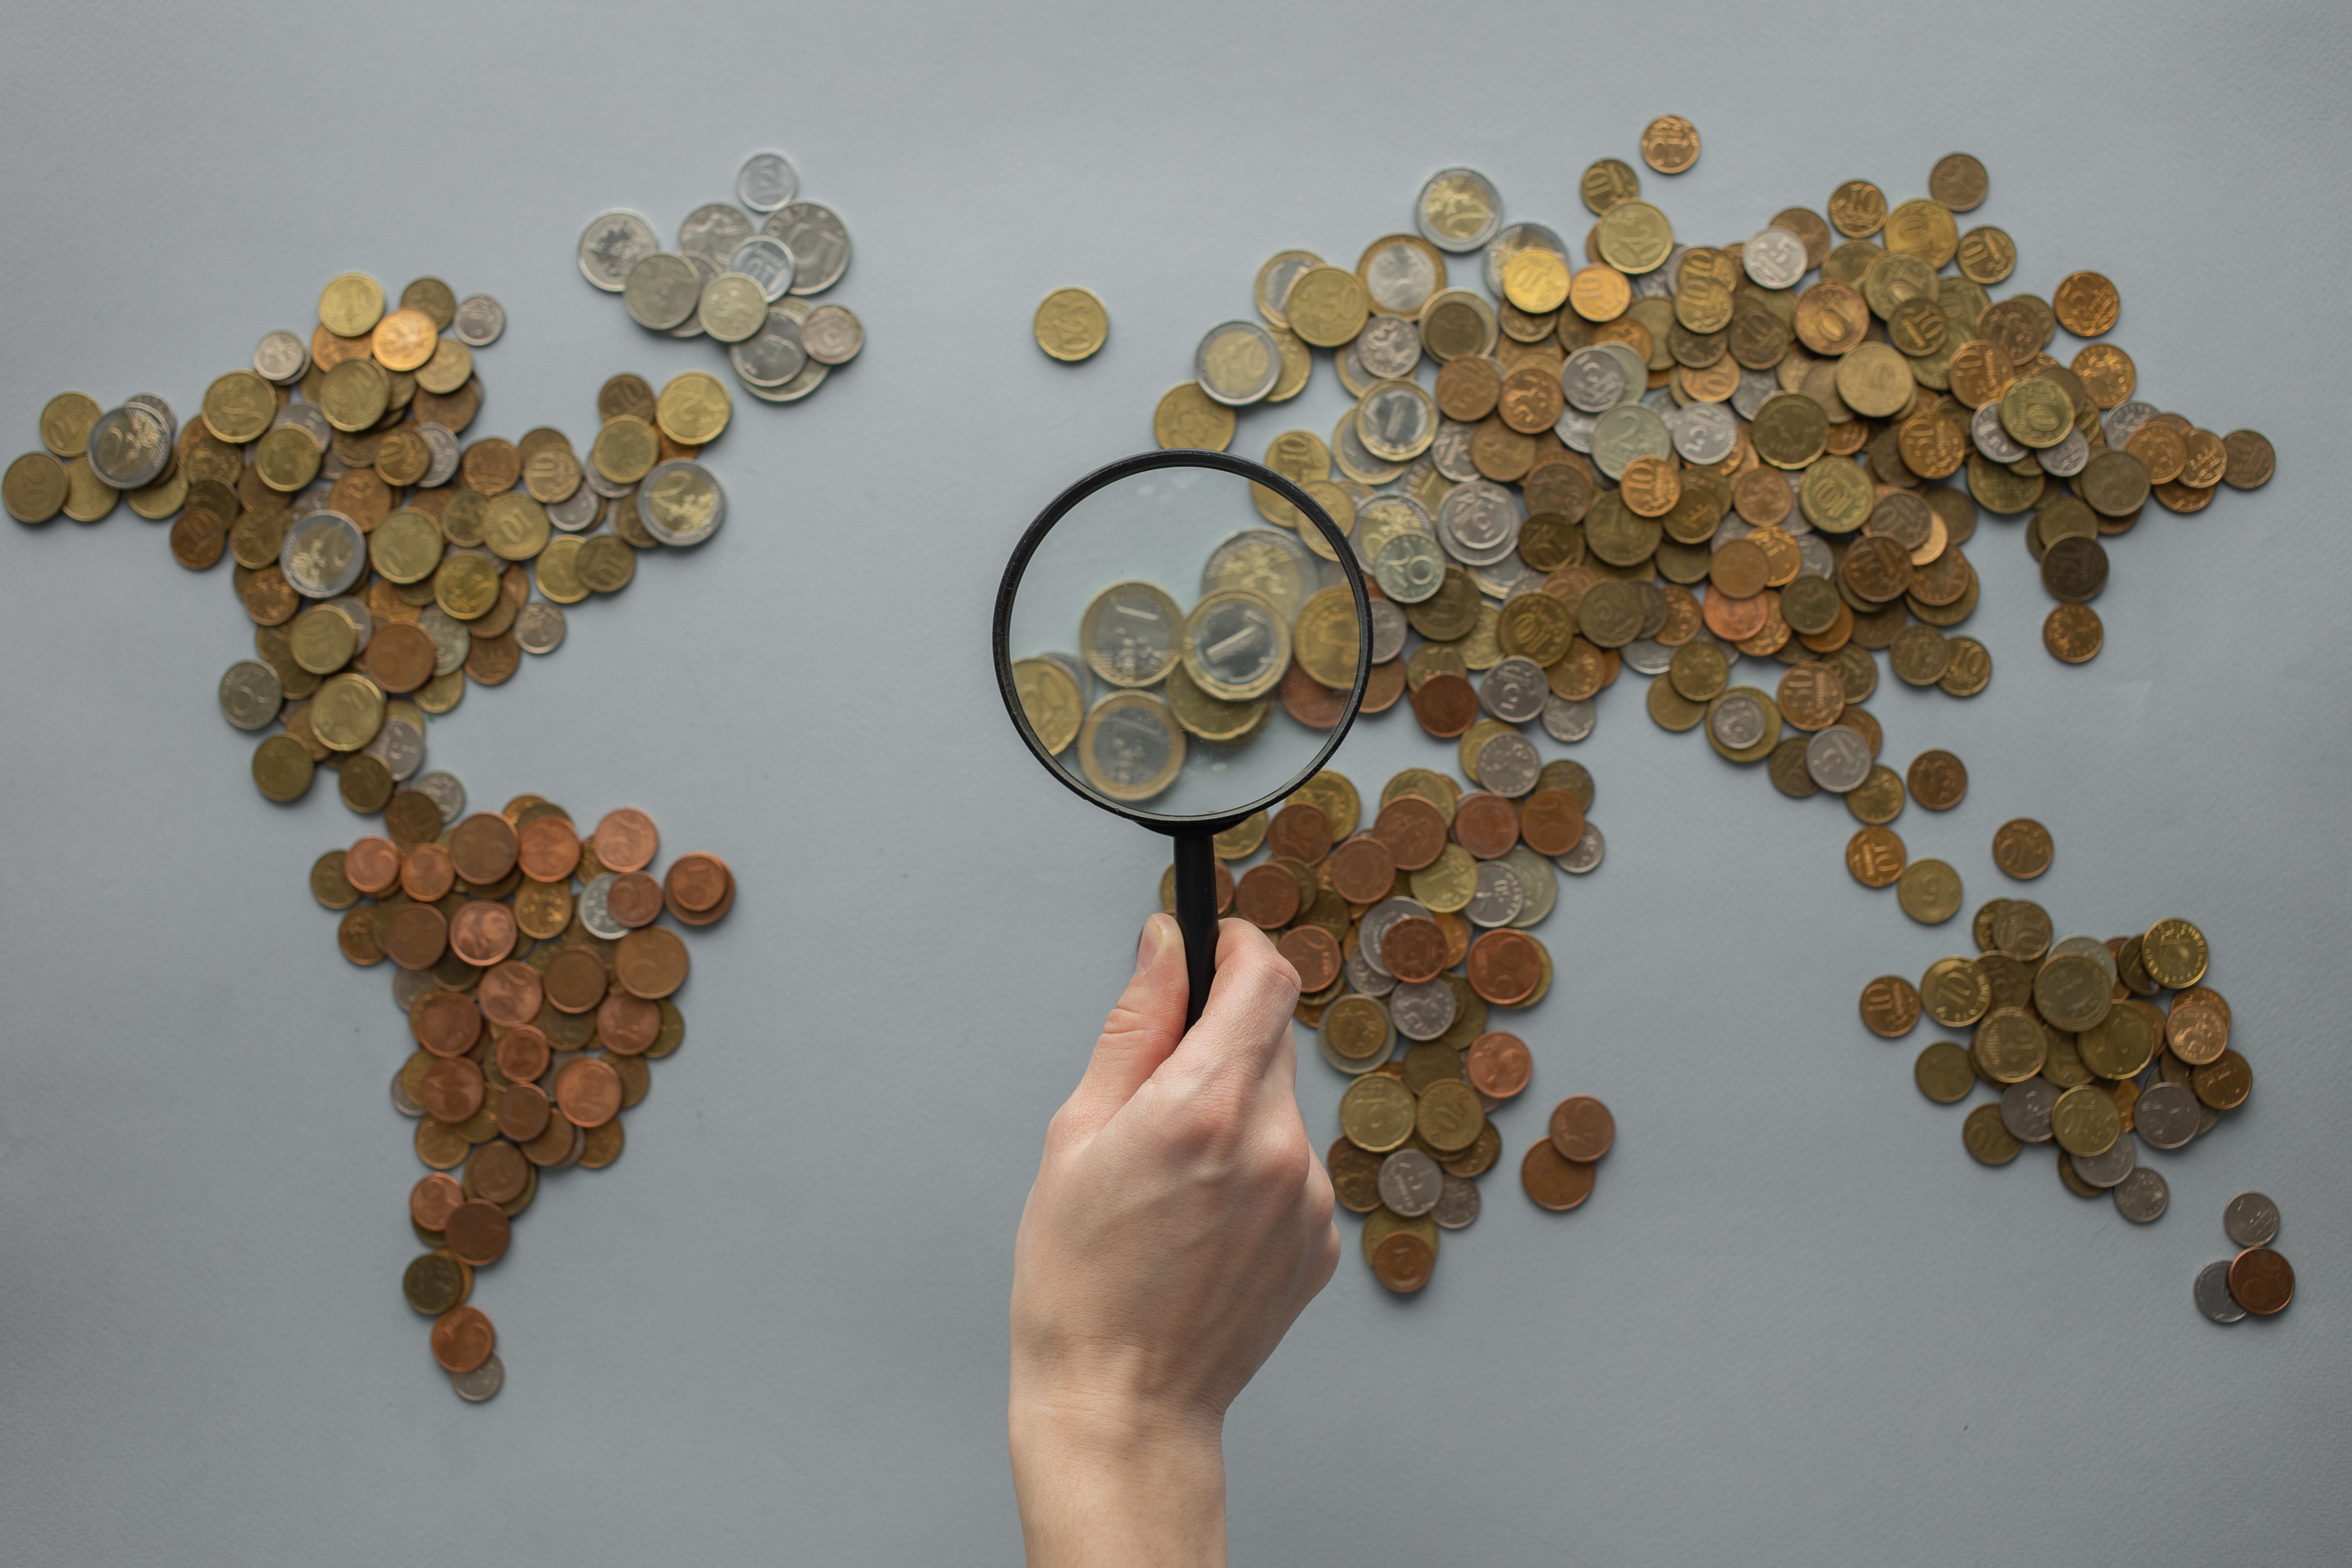 a world map laid out in coins, with hand holding a magnifying glass over the coins representing continental Europe